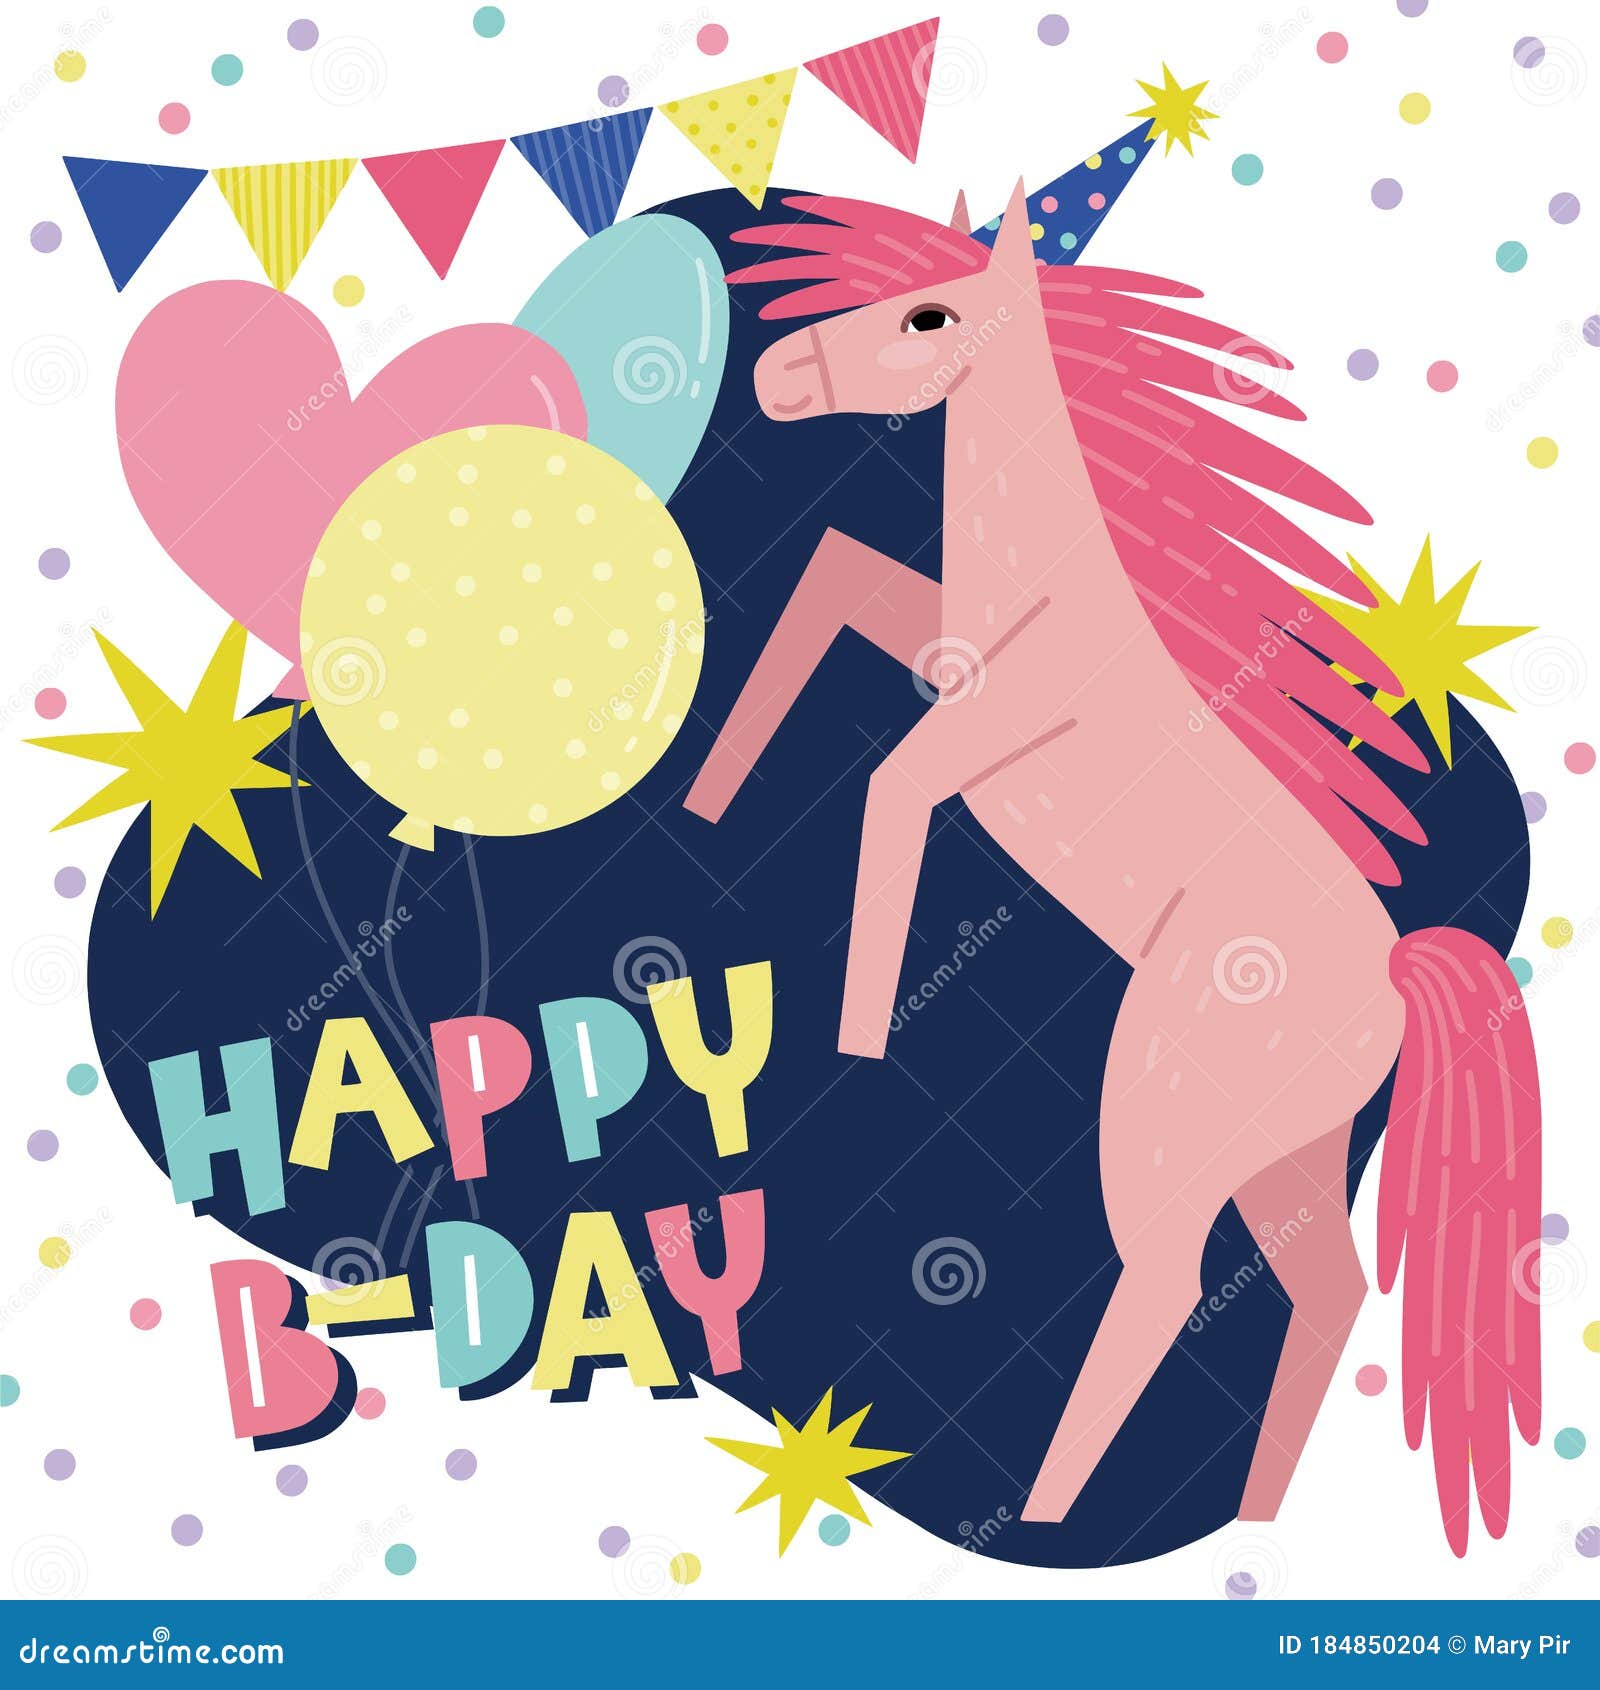 B-Day Wishes Vector Greeting Card Template Stock Vector - Illustration ...